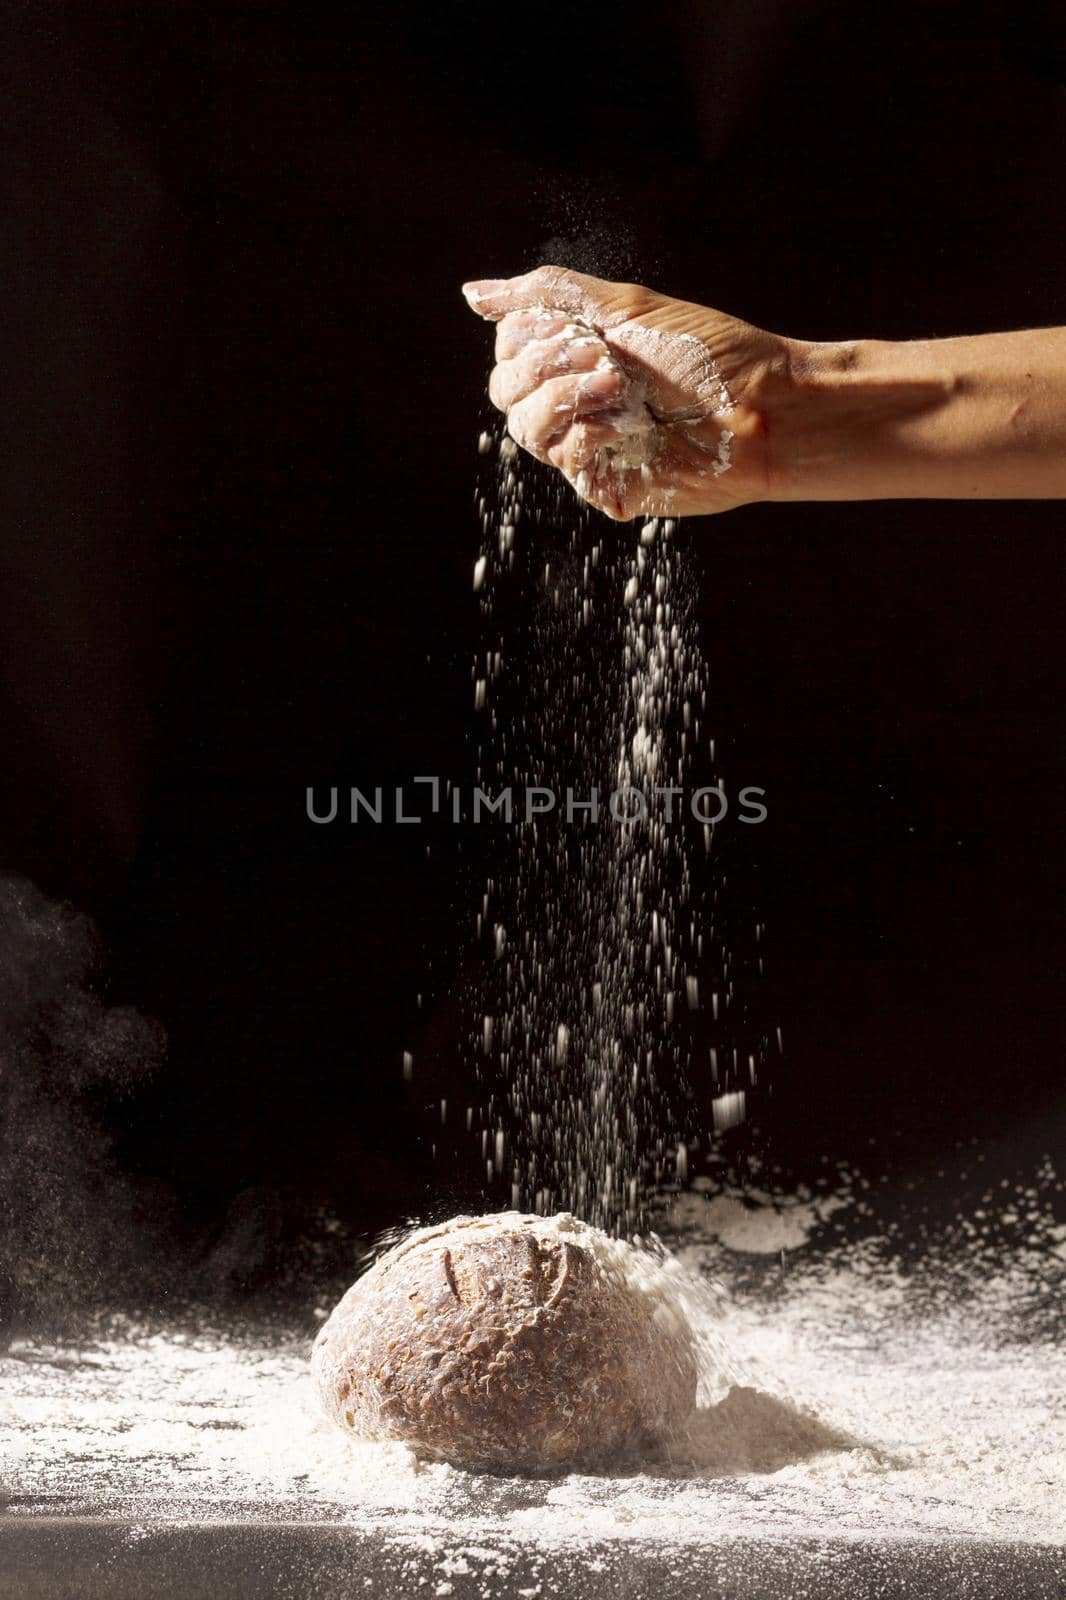 hand pours flour baked bread. High quality beautiful photo concept by Zahard